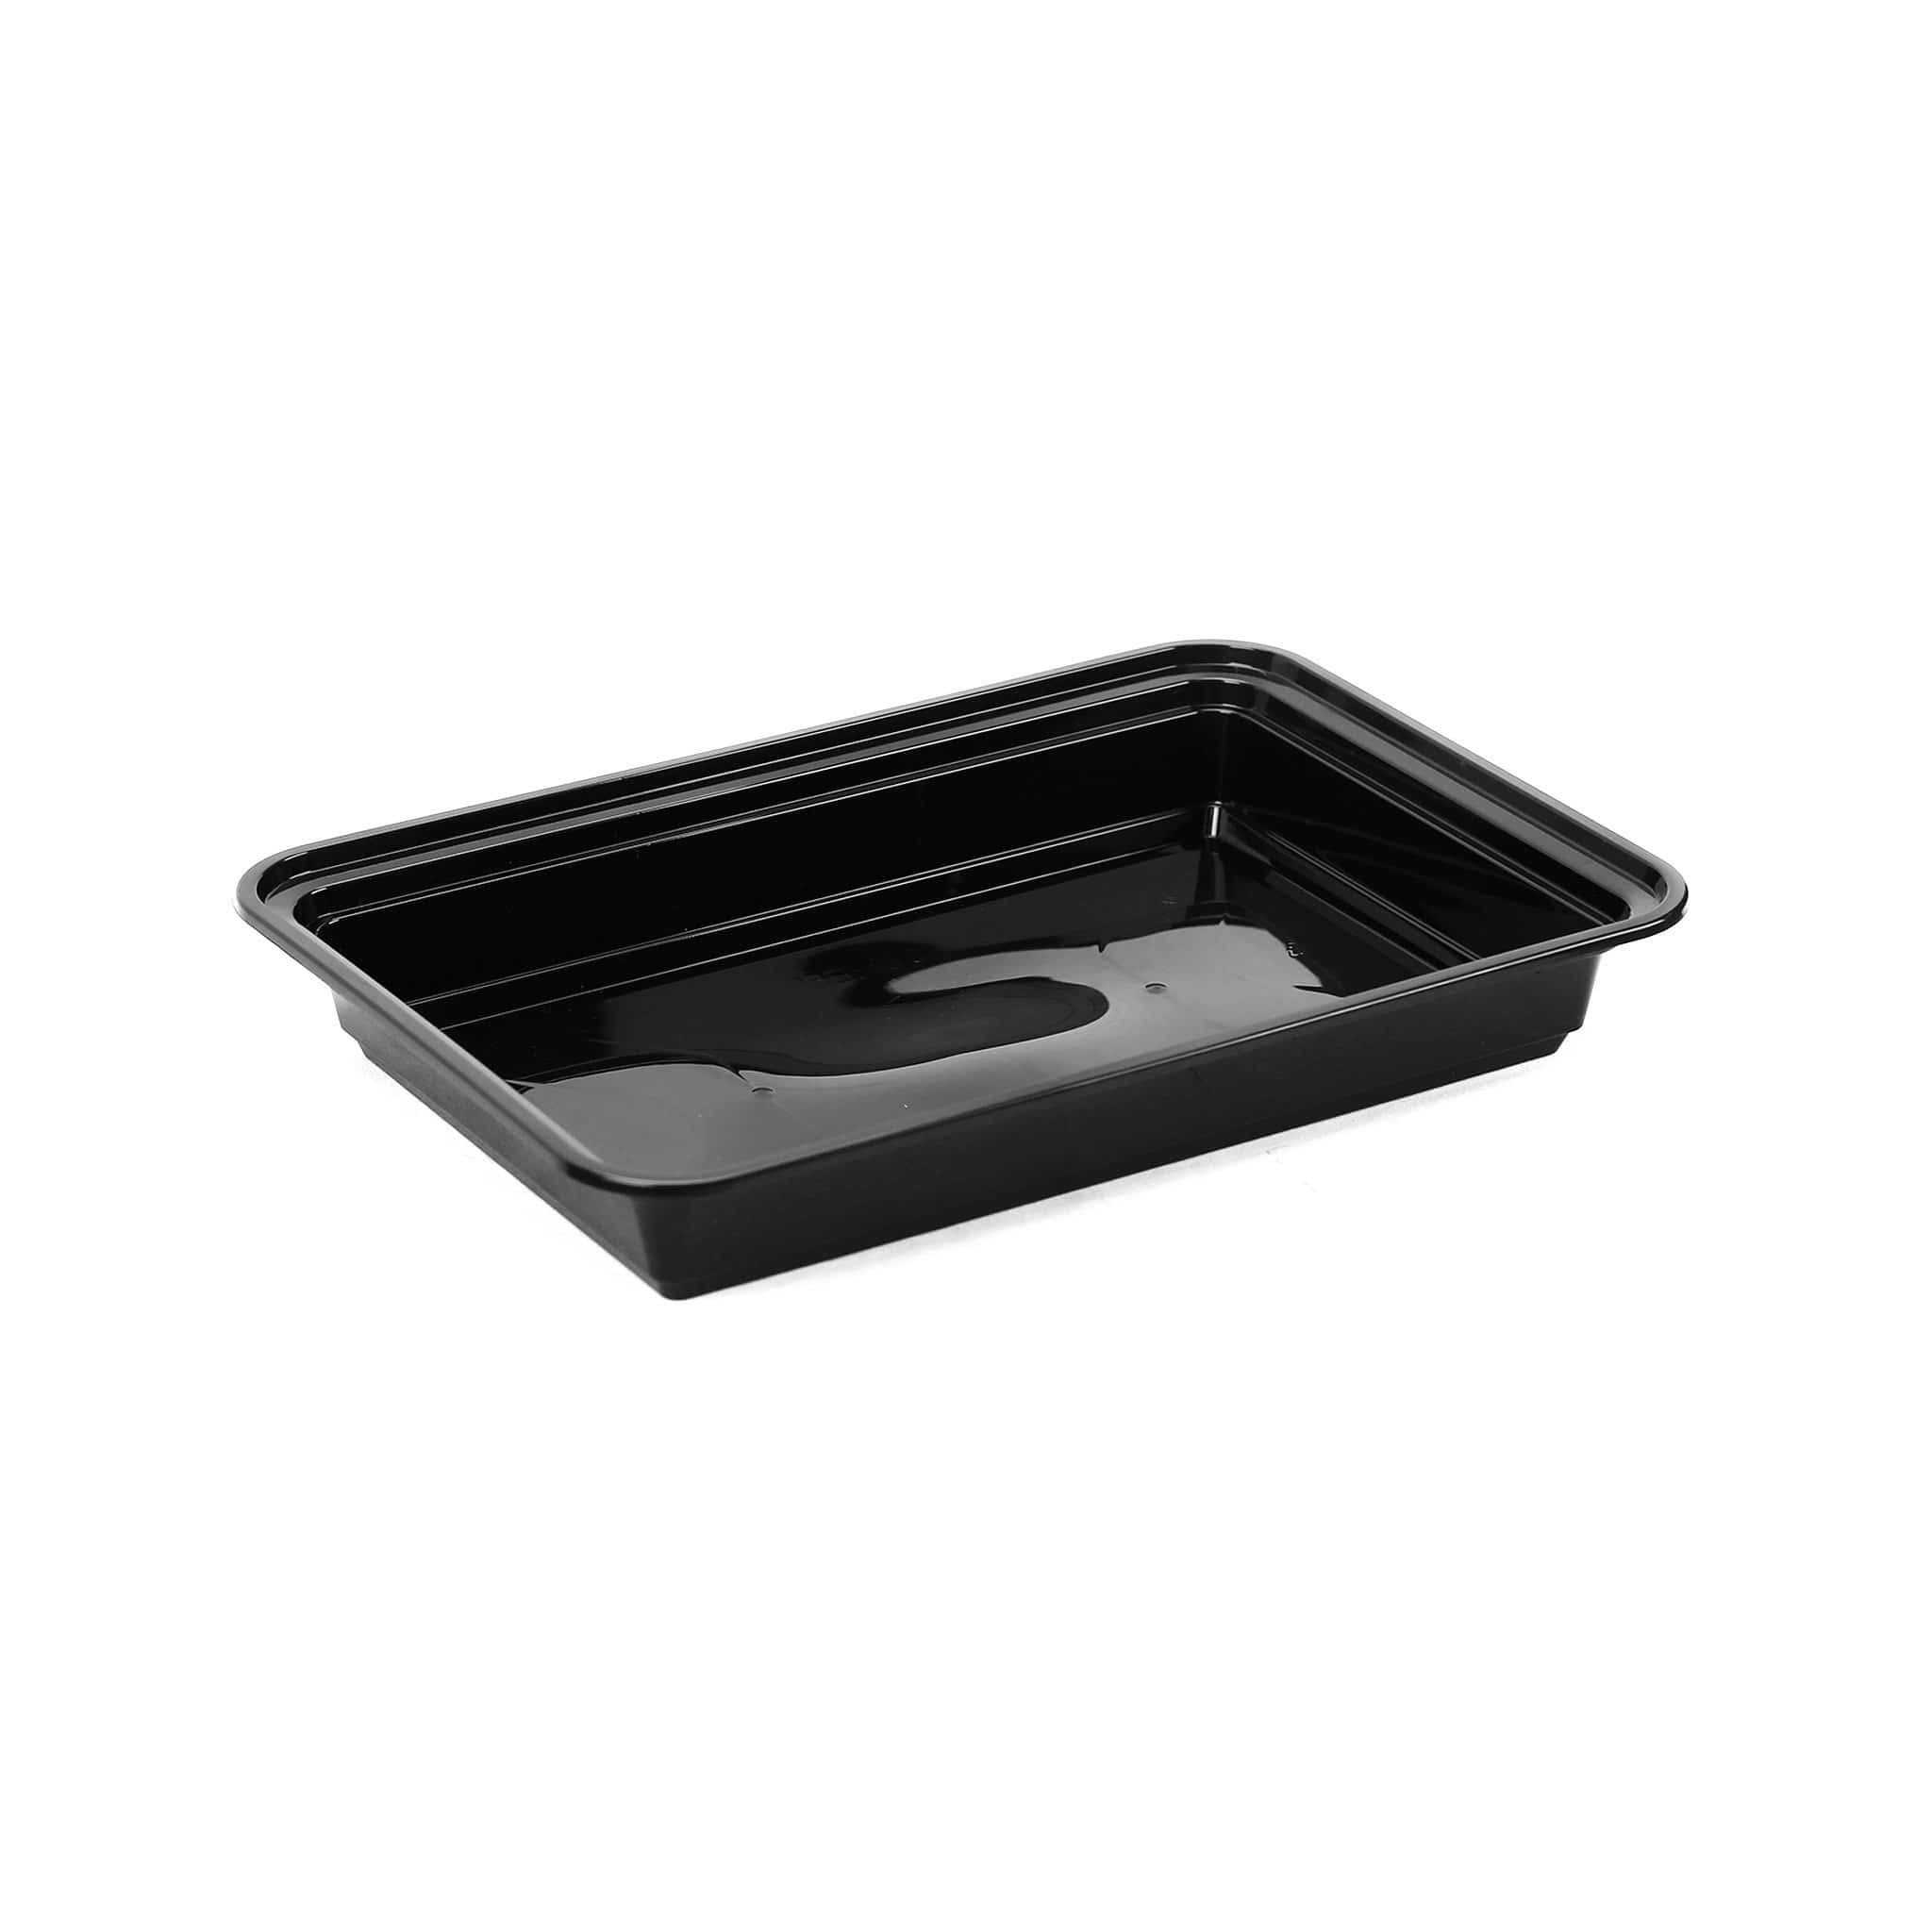 Black Base Rectangular Container 58 Oz 300 Pieces - Hotpack Global